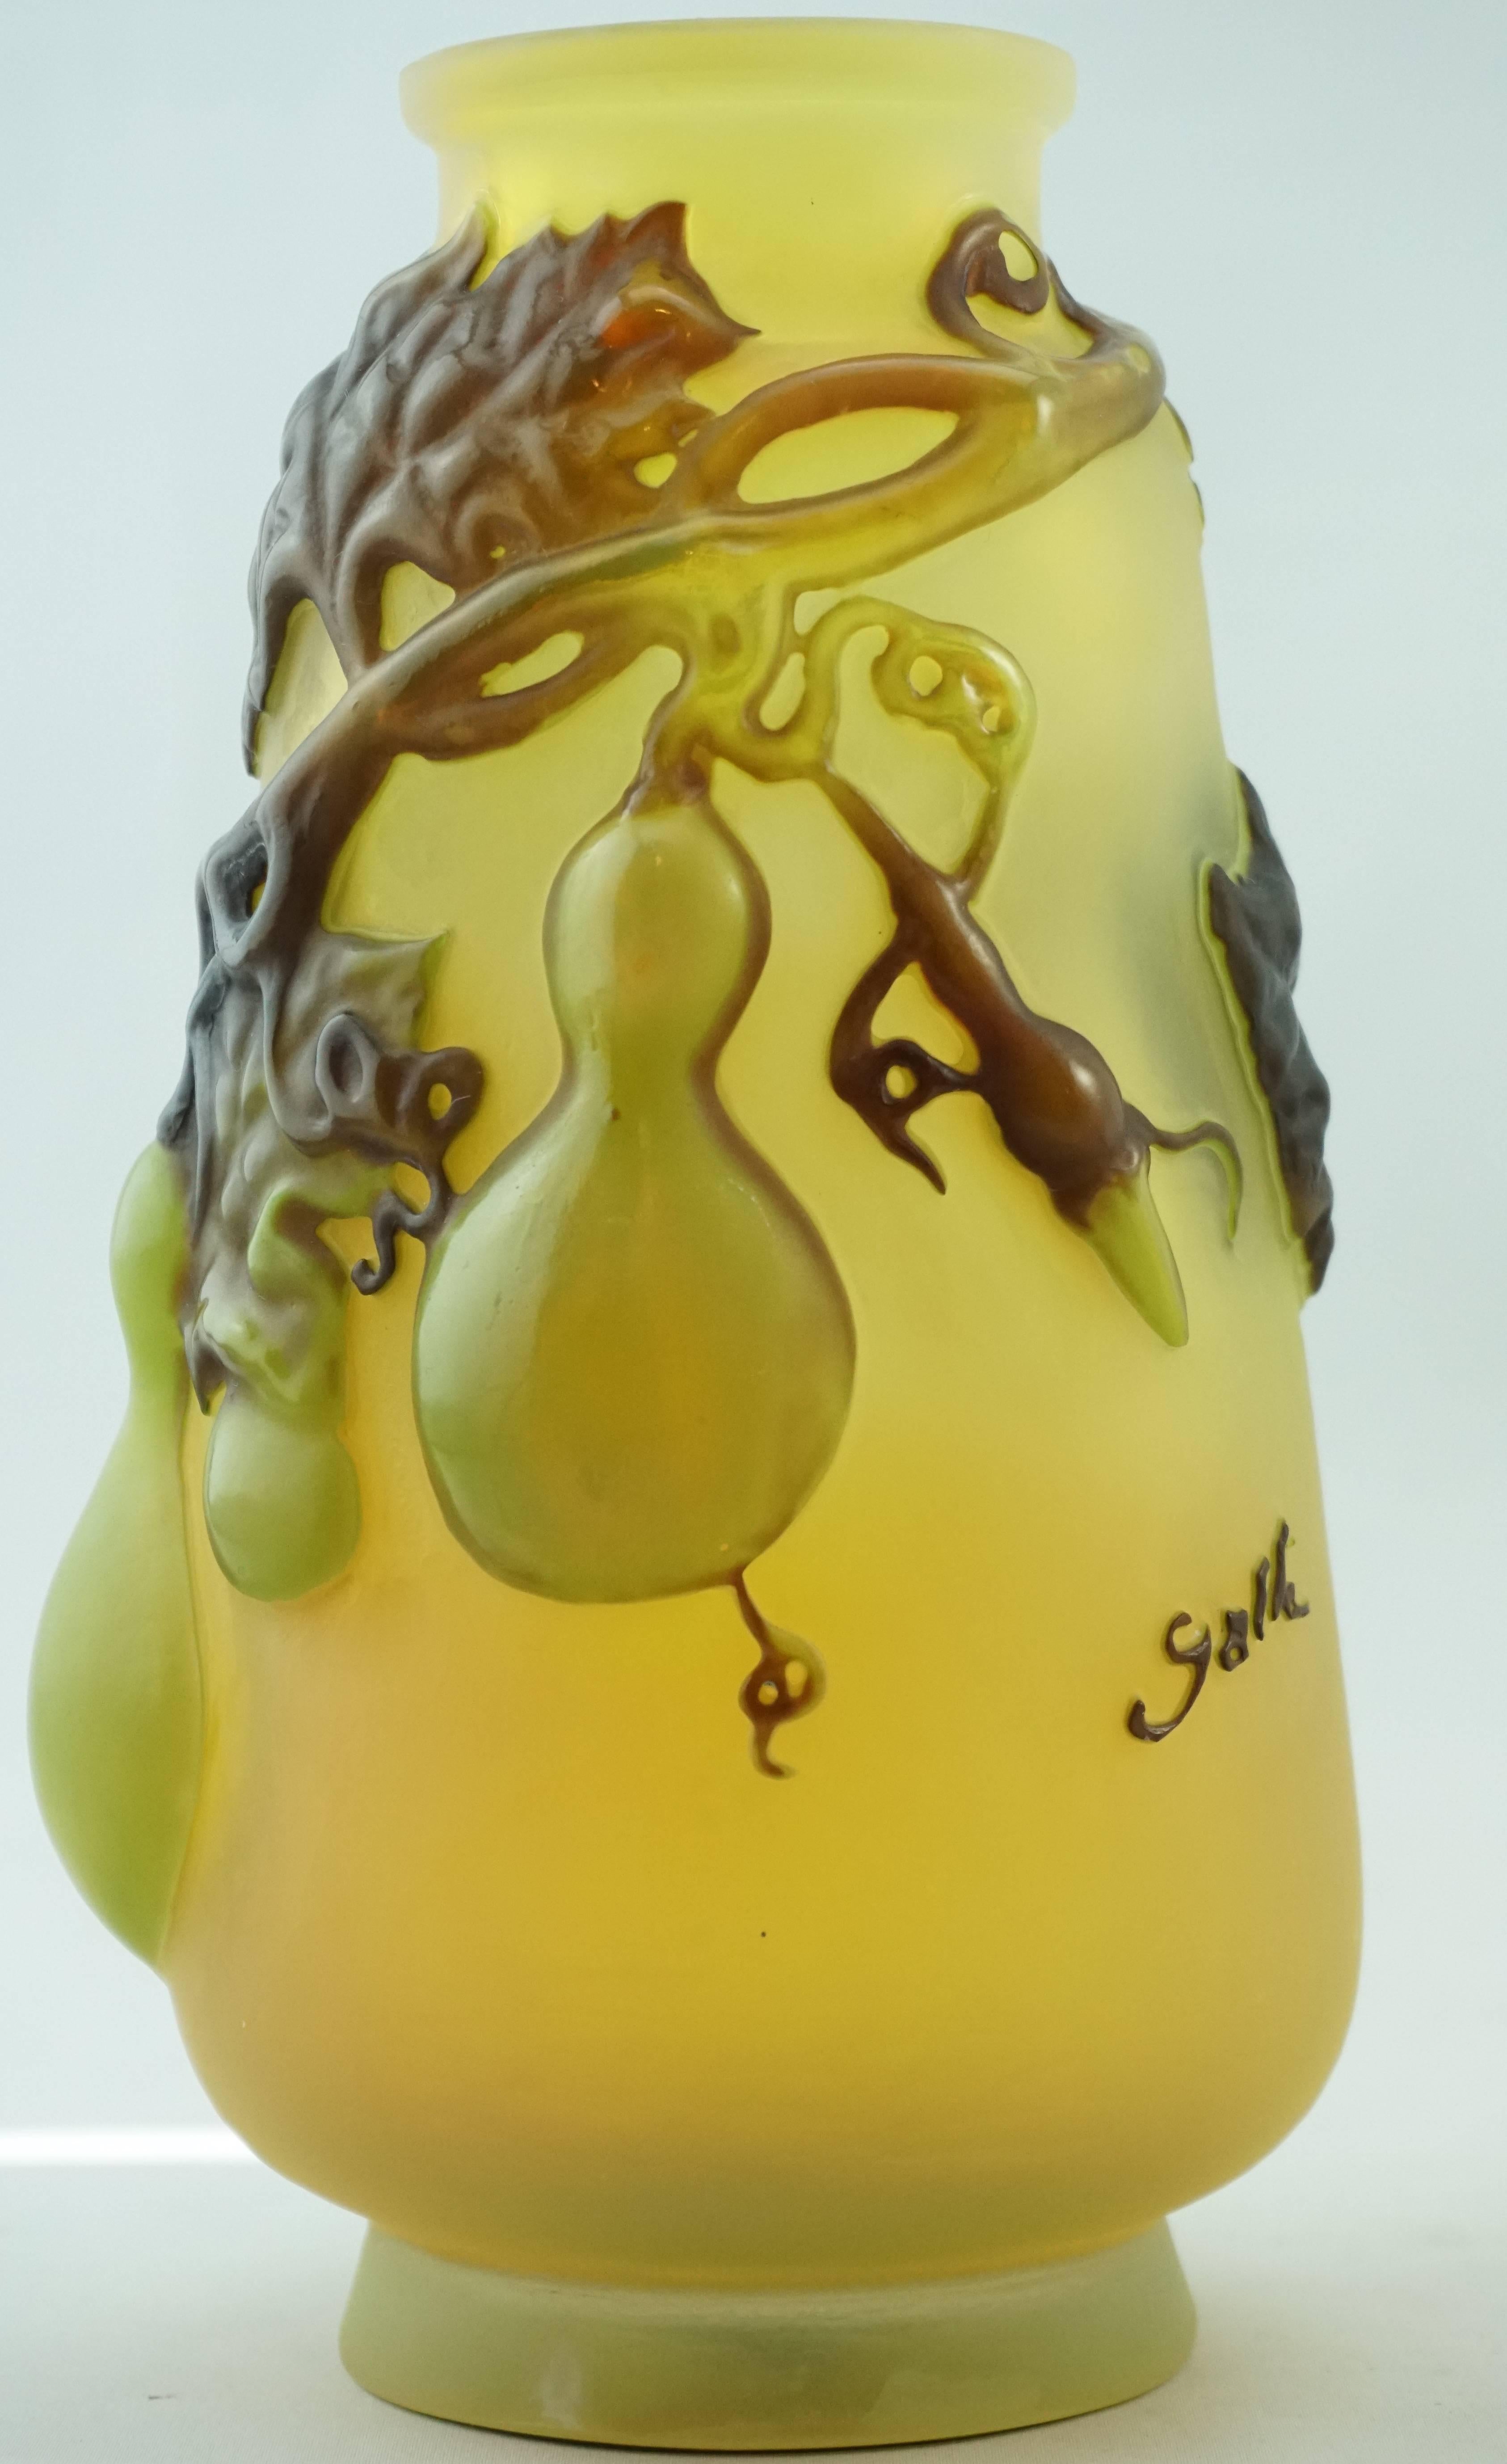 Emile Galle blown out gourd and vines vase. Blown out vases are rare and very desirable. This mold blown model is an exceptional example because the gourds are blown out quite far and are truly three-dimensional. The color on the gourds is